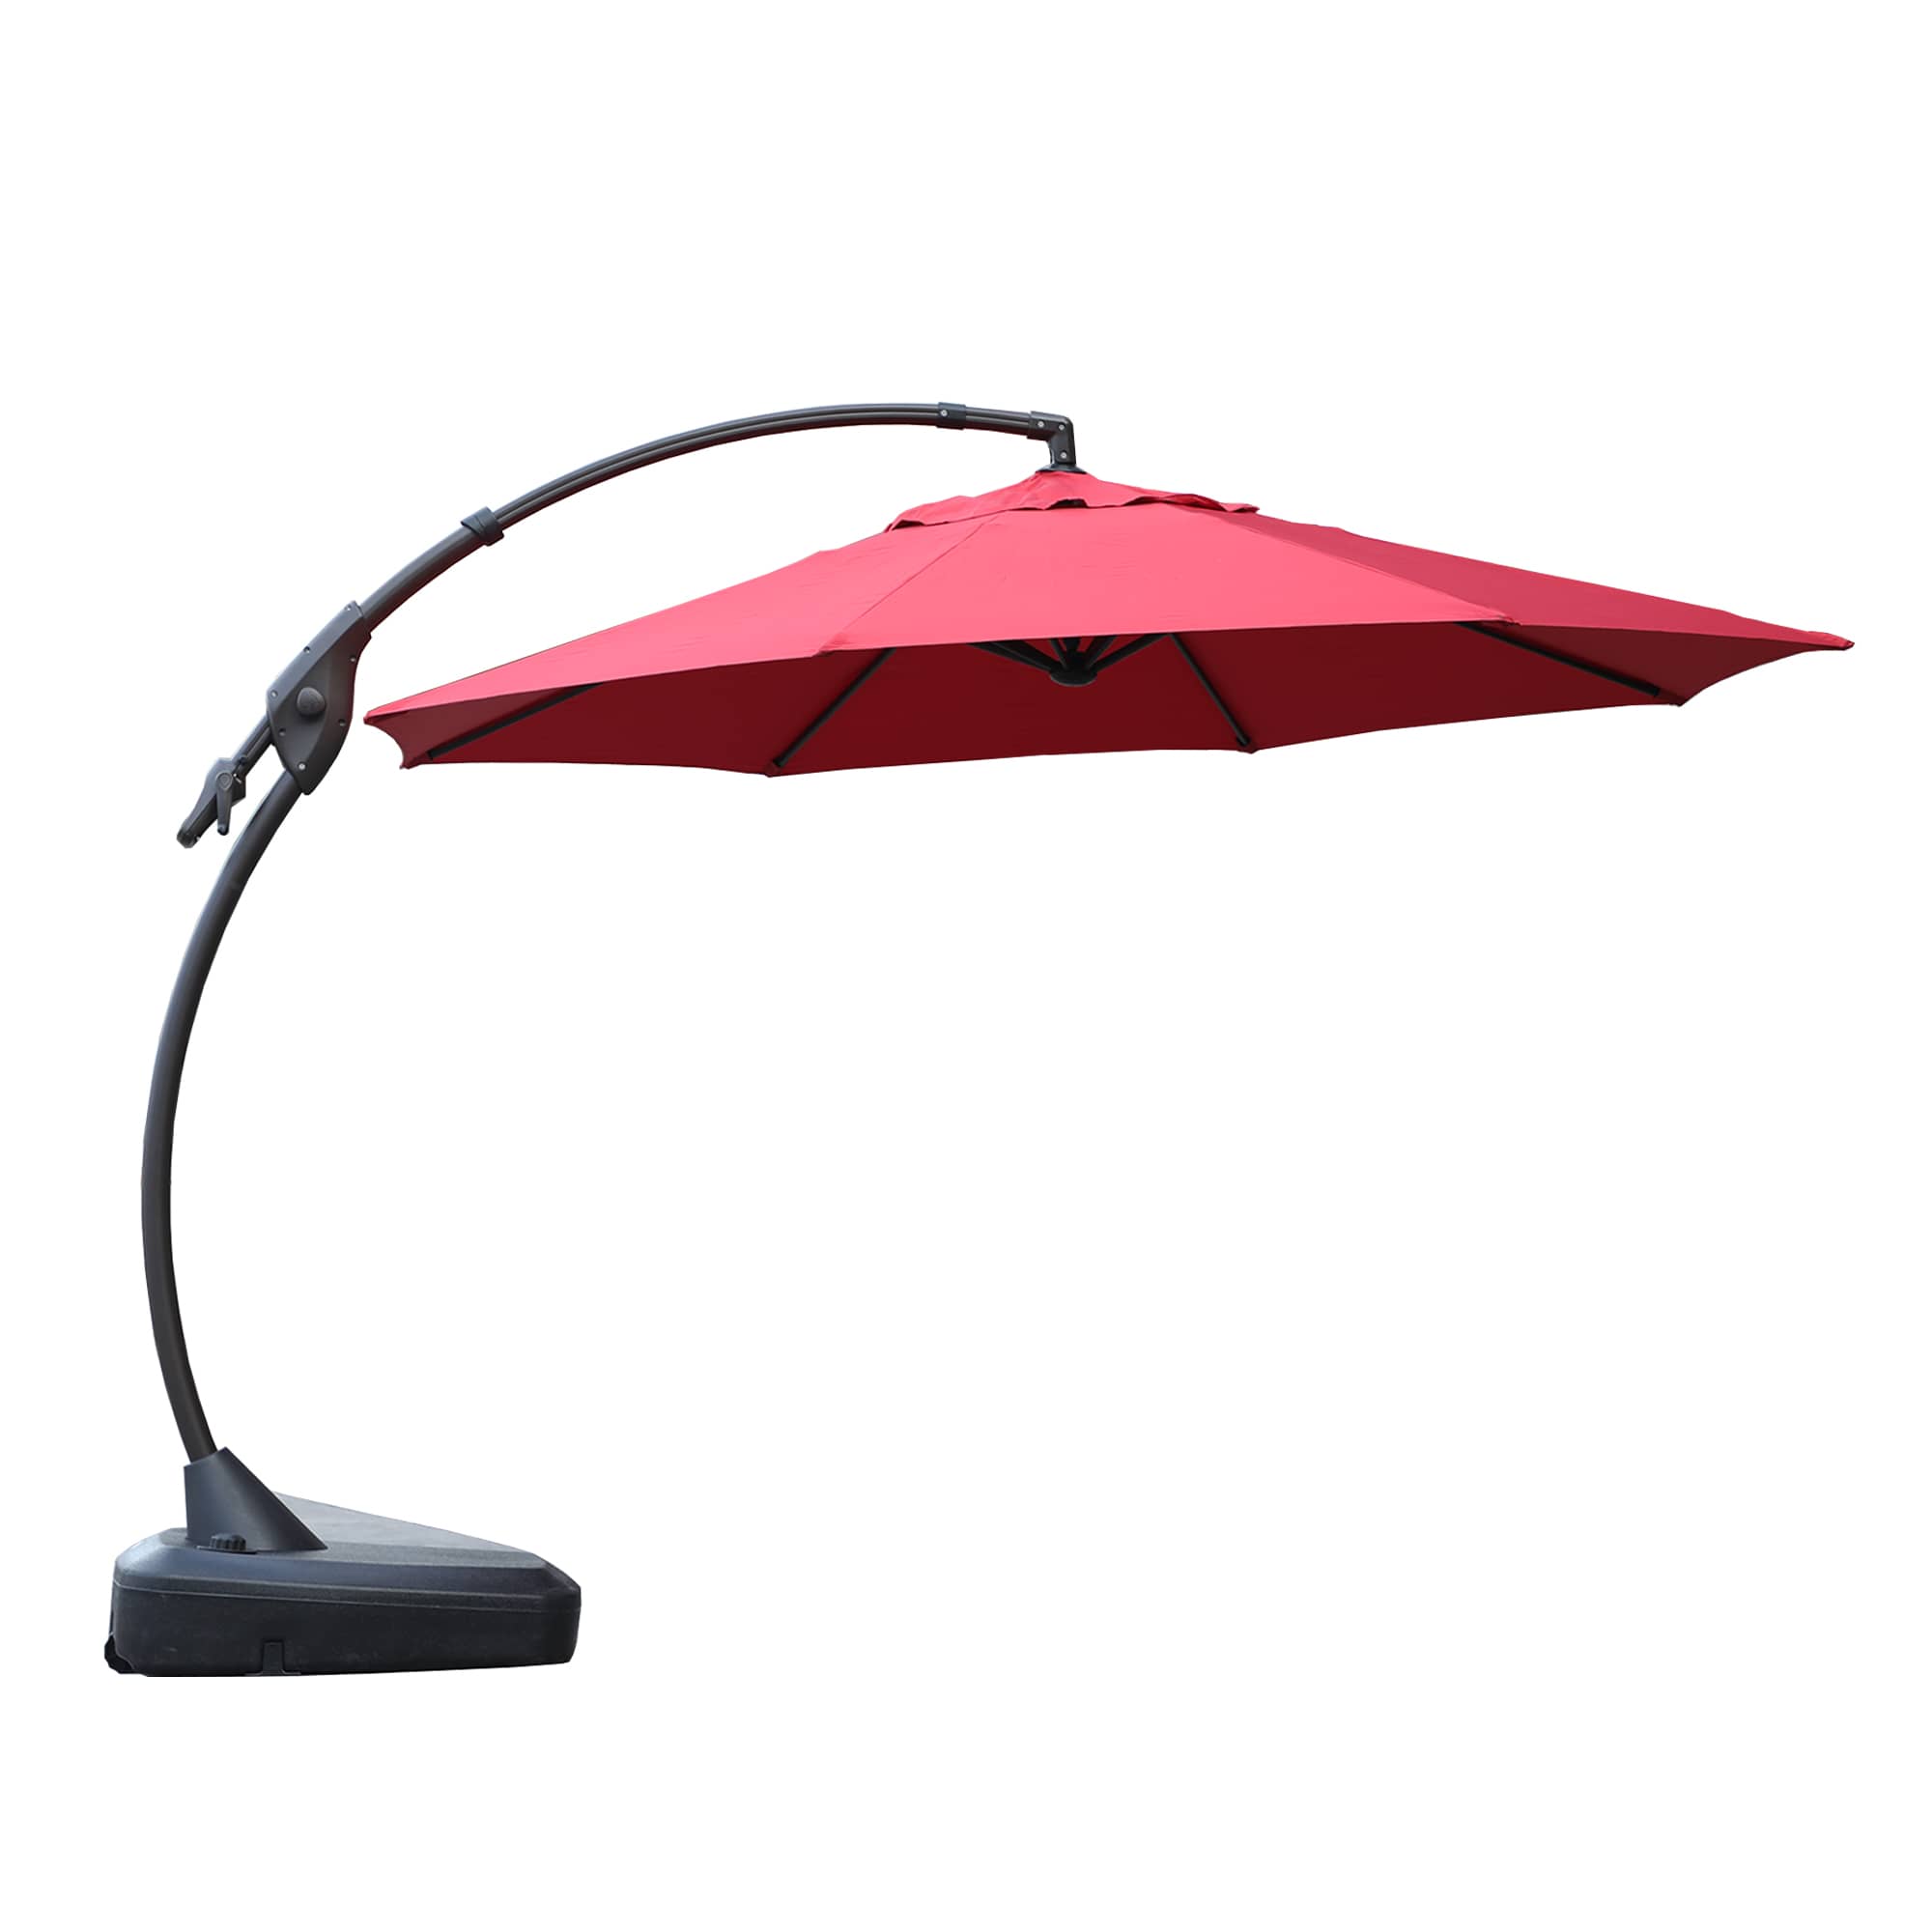 12 ft. Aluminum Pole Octagon Cantilever Patio Umbrella with Base in Red or Beige